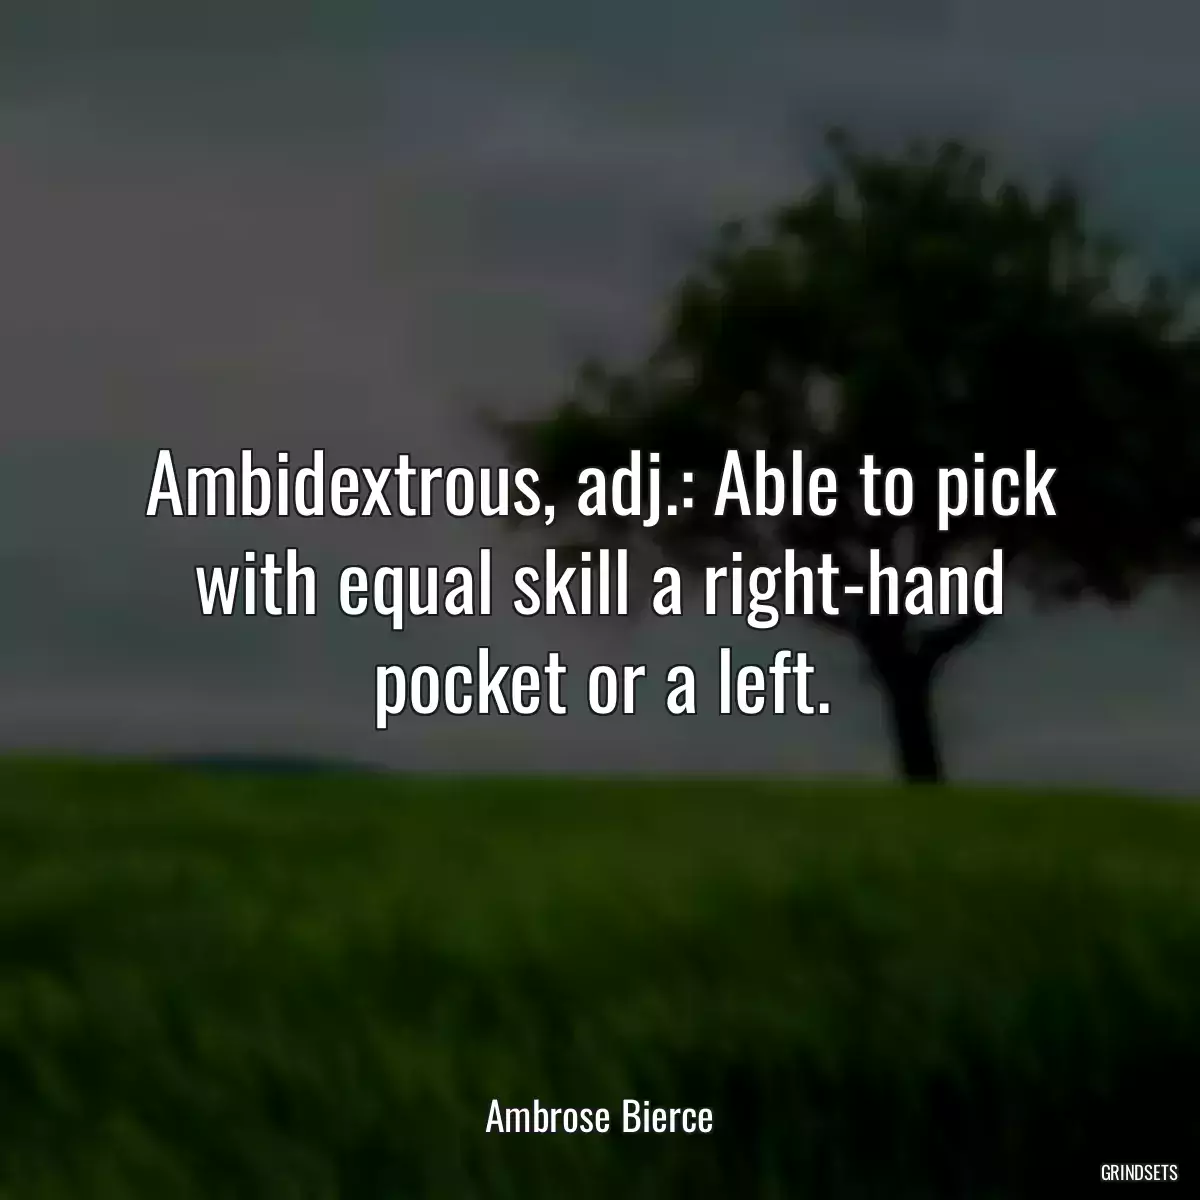 Ambidextrous, adj.: Able to pick with equal skill a right-hand pocket or a left.